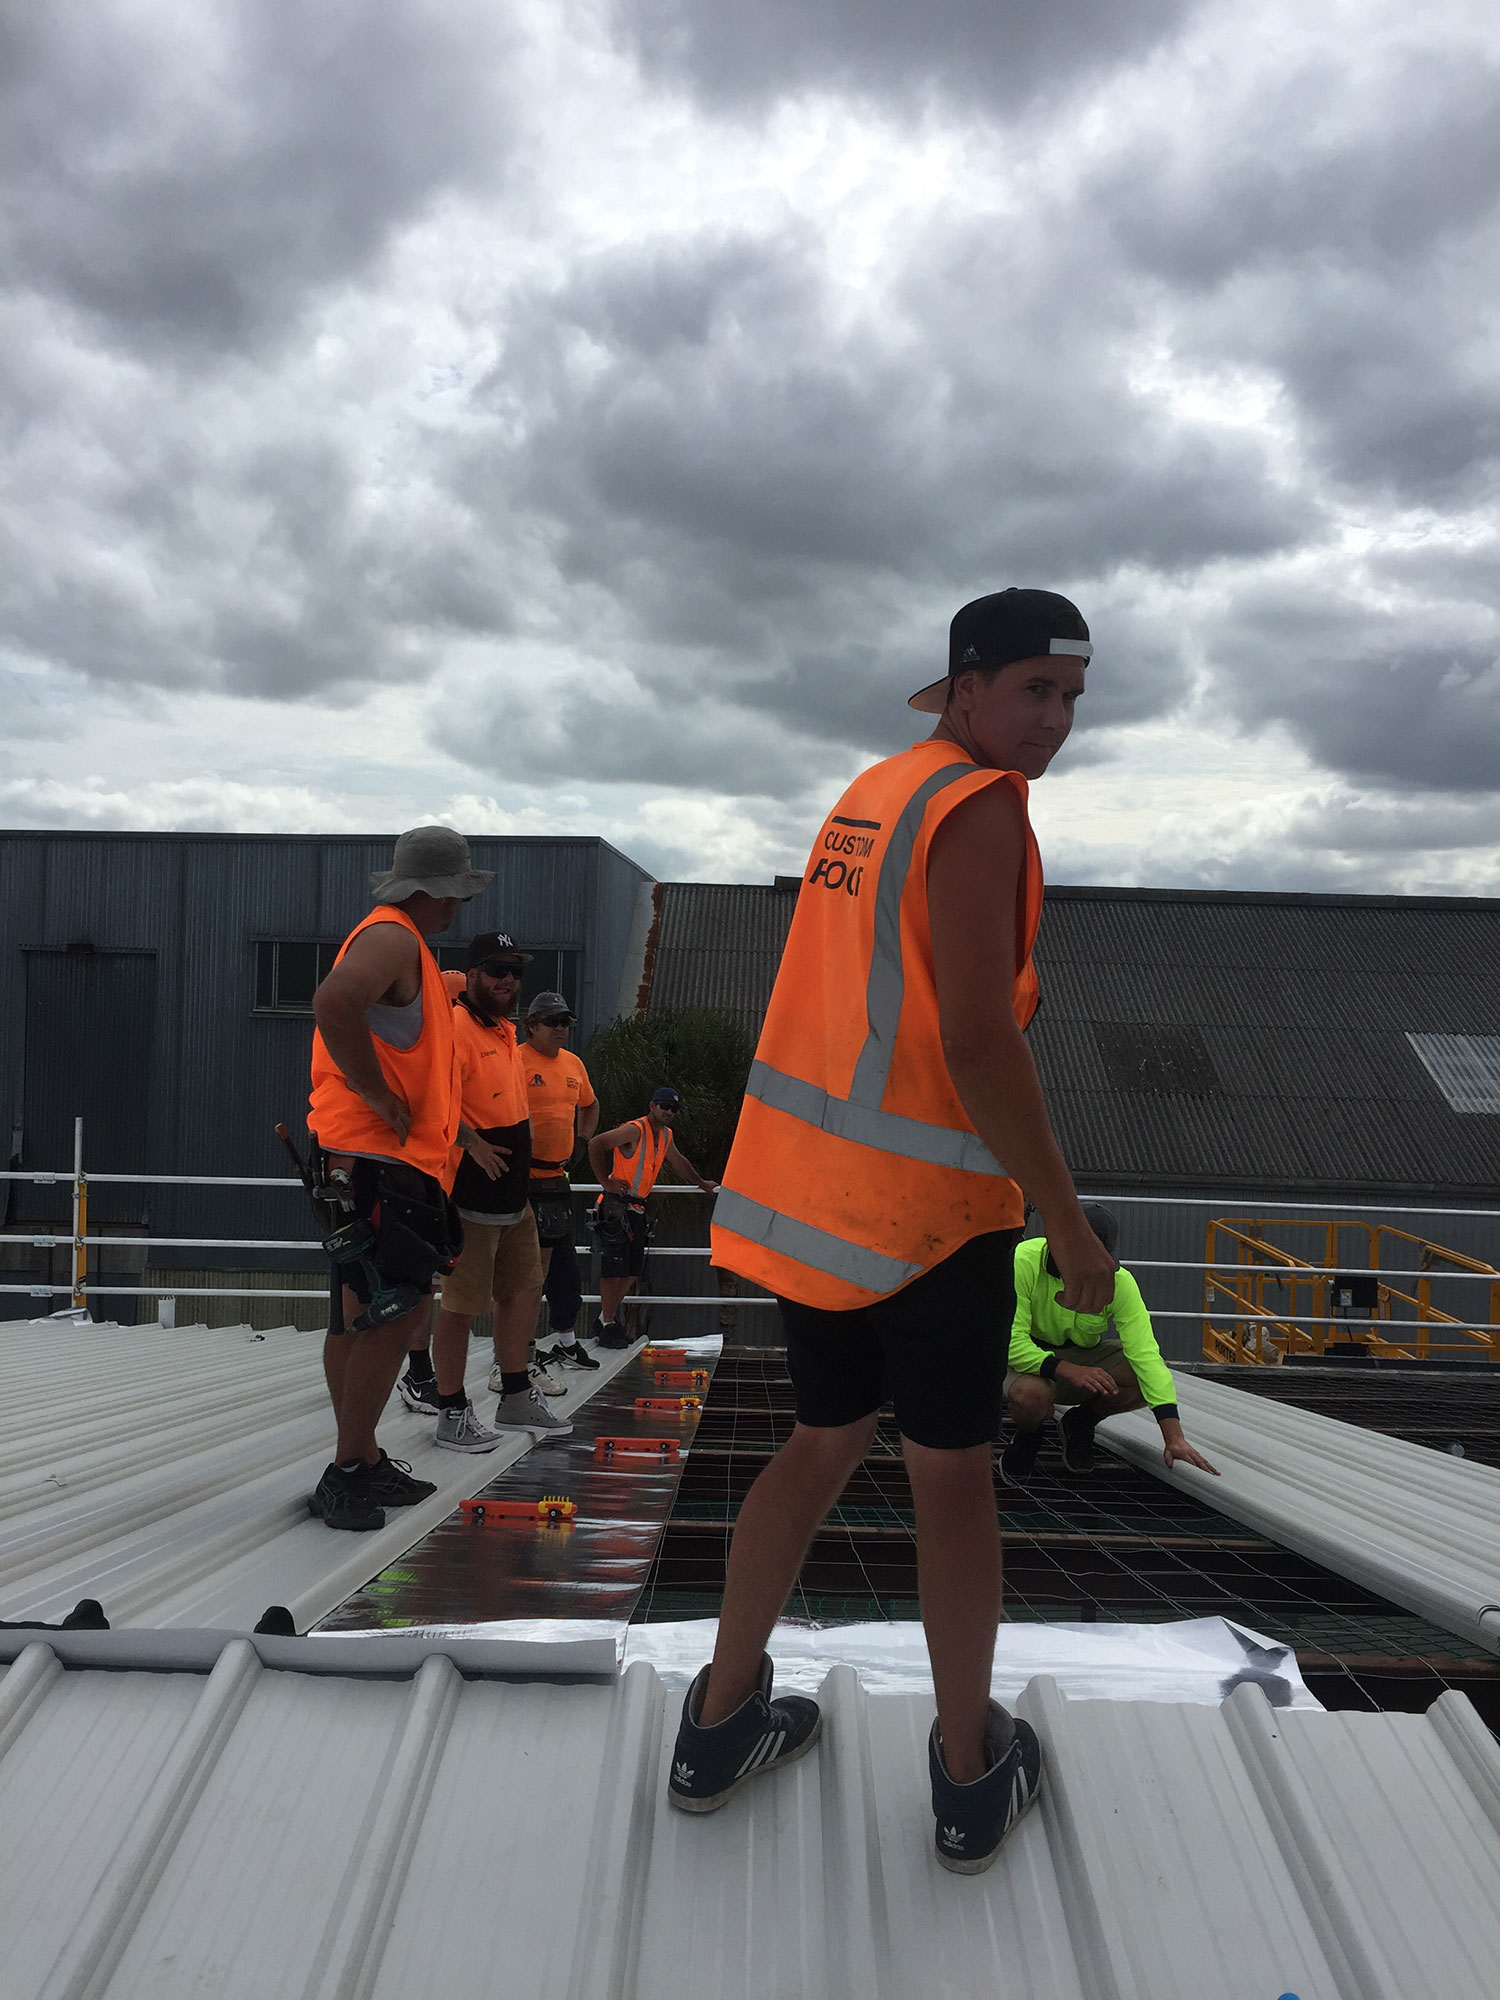 auckland roofing solutions services auckland and new zealand wide new roofs repair cladding and more Project gallery 64